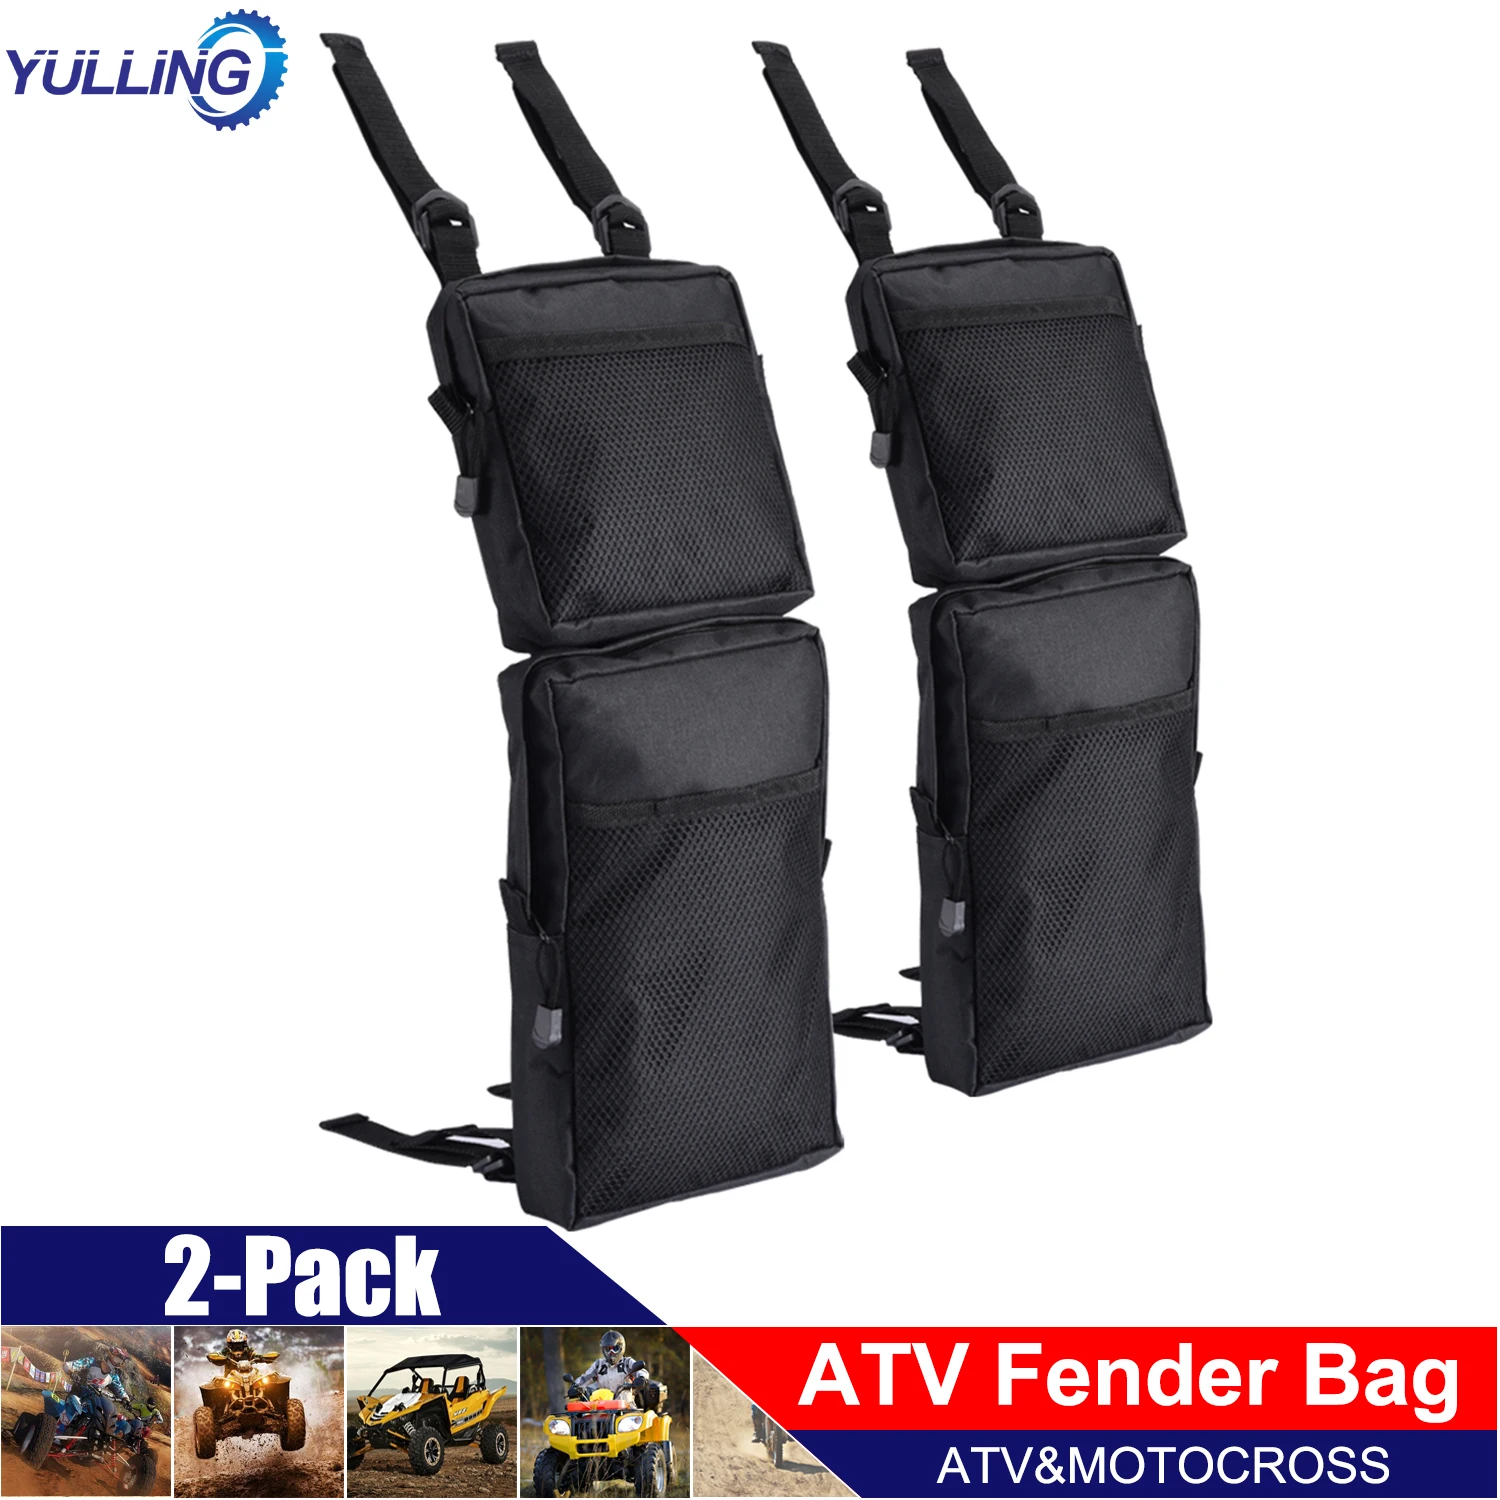 New 2pcs 600D Oxford ATV Fender Bags ATV Tank Saddle Bags Cargo Storage Hunting Bag Shipping Fast delivery Dropshipping